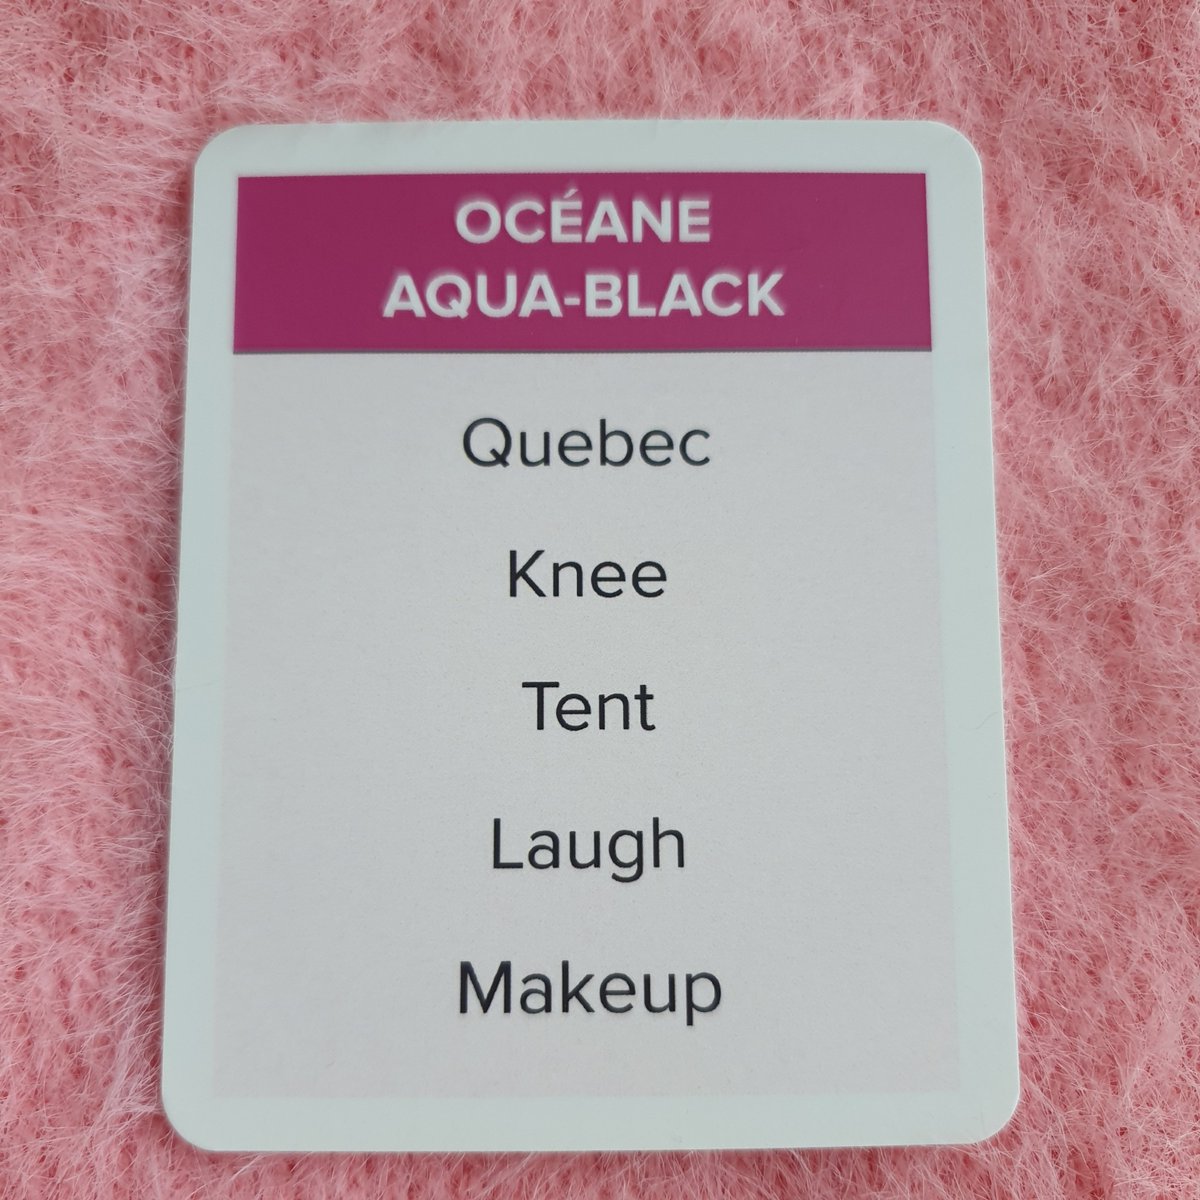 Describe the queen without using any of the other words #DragRace #DragRaceTaboo #DragRaceCanada @OceaneAquablack